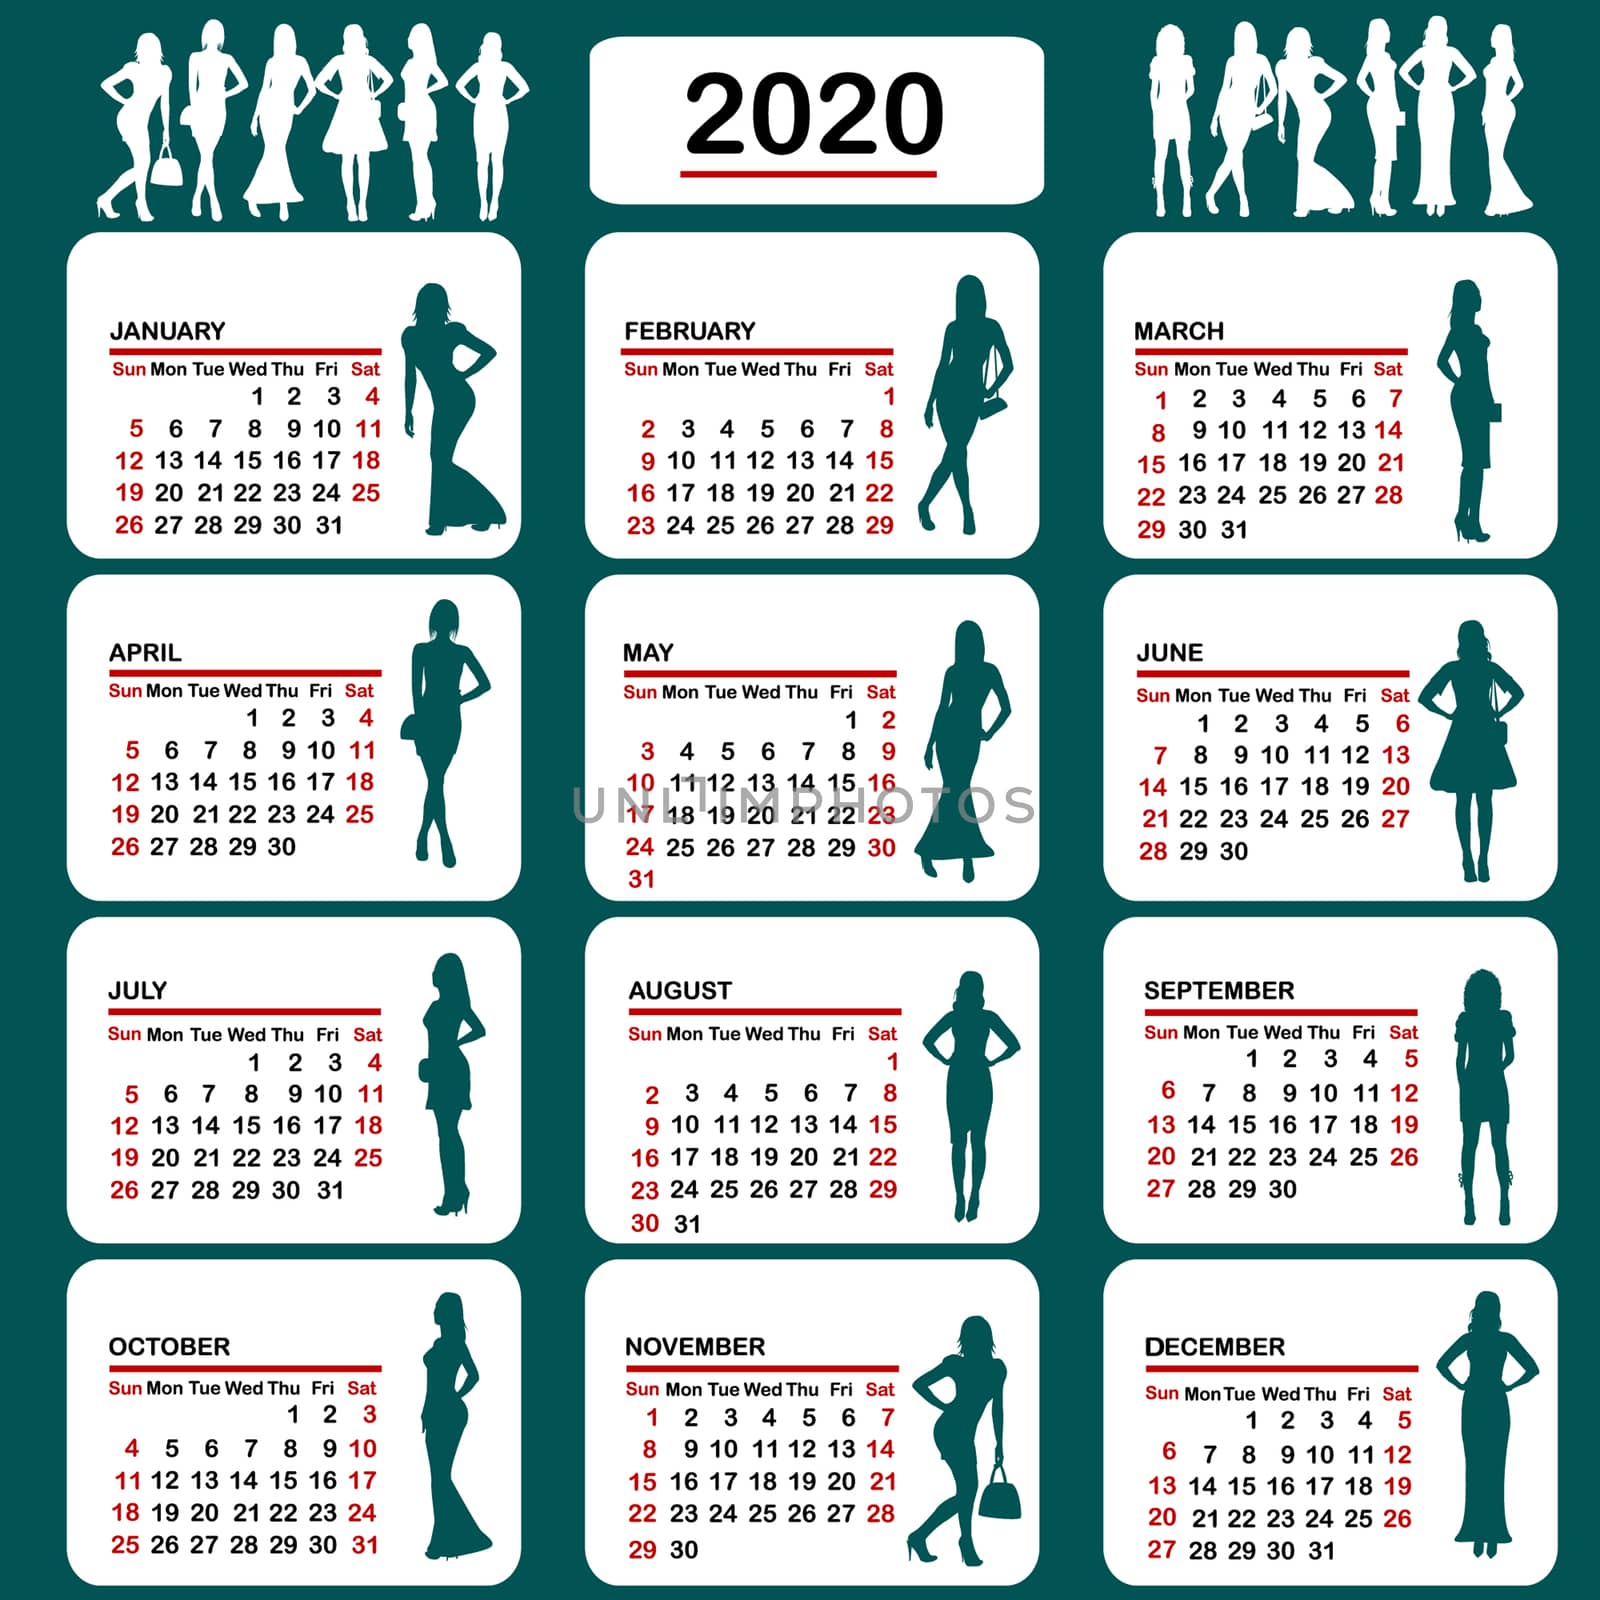 2020 calendar with fashion silhouettes of women by hibrida13